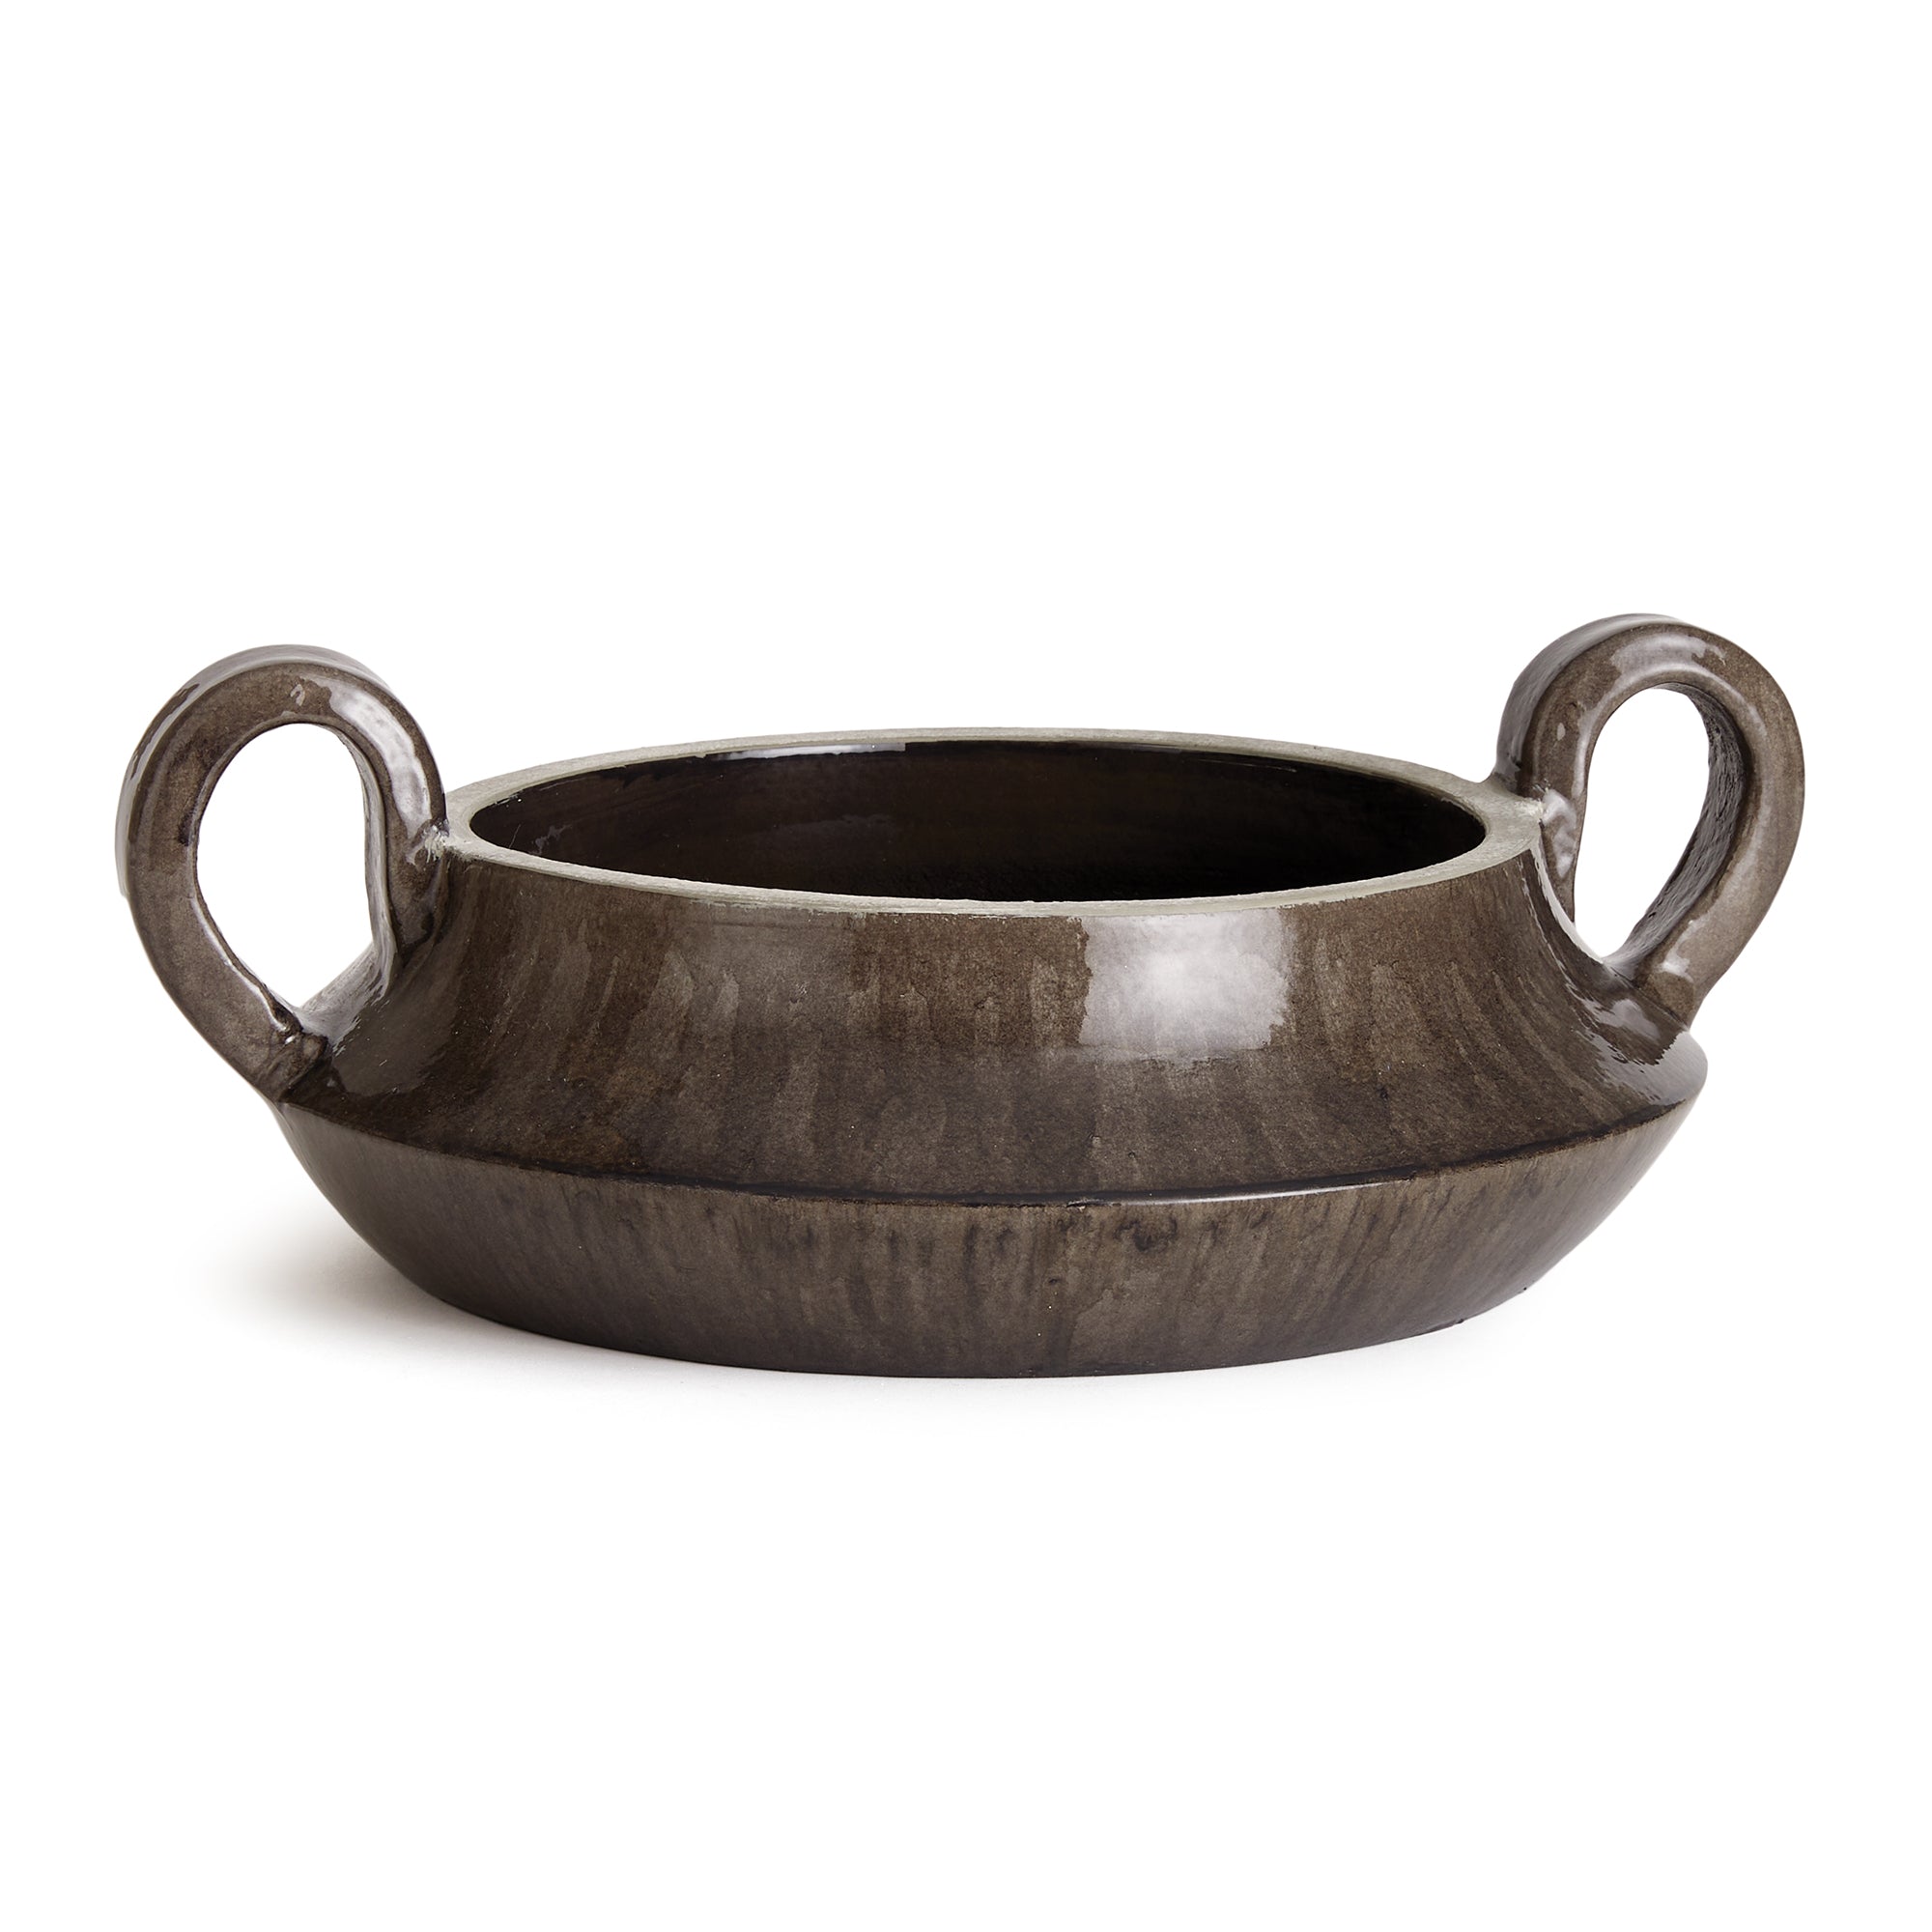 This vintage-inspired deep soothing gray bowl is not short on character and charm. From the unique shape, to the elevated loop handles and artistically uneven glaze, it makes a beautiful accent for kitchen or dining room. Amethyst Home provides interior design, new construction, custom furniture, and area rugs in the San Diego metro area.